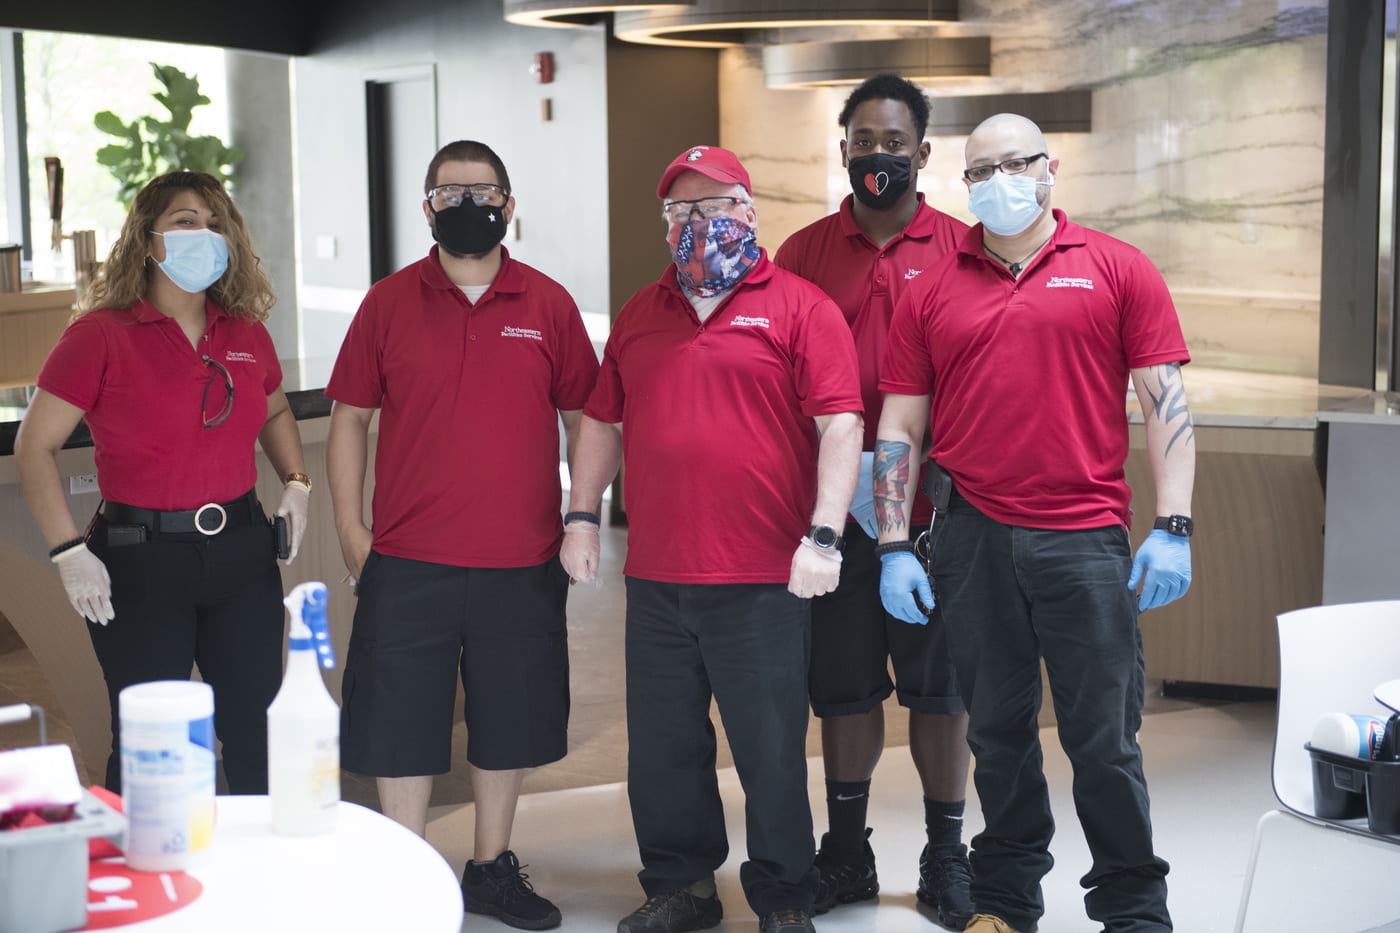 The Small Army of Cleaners Keeping Northeastern Safe